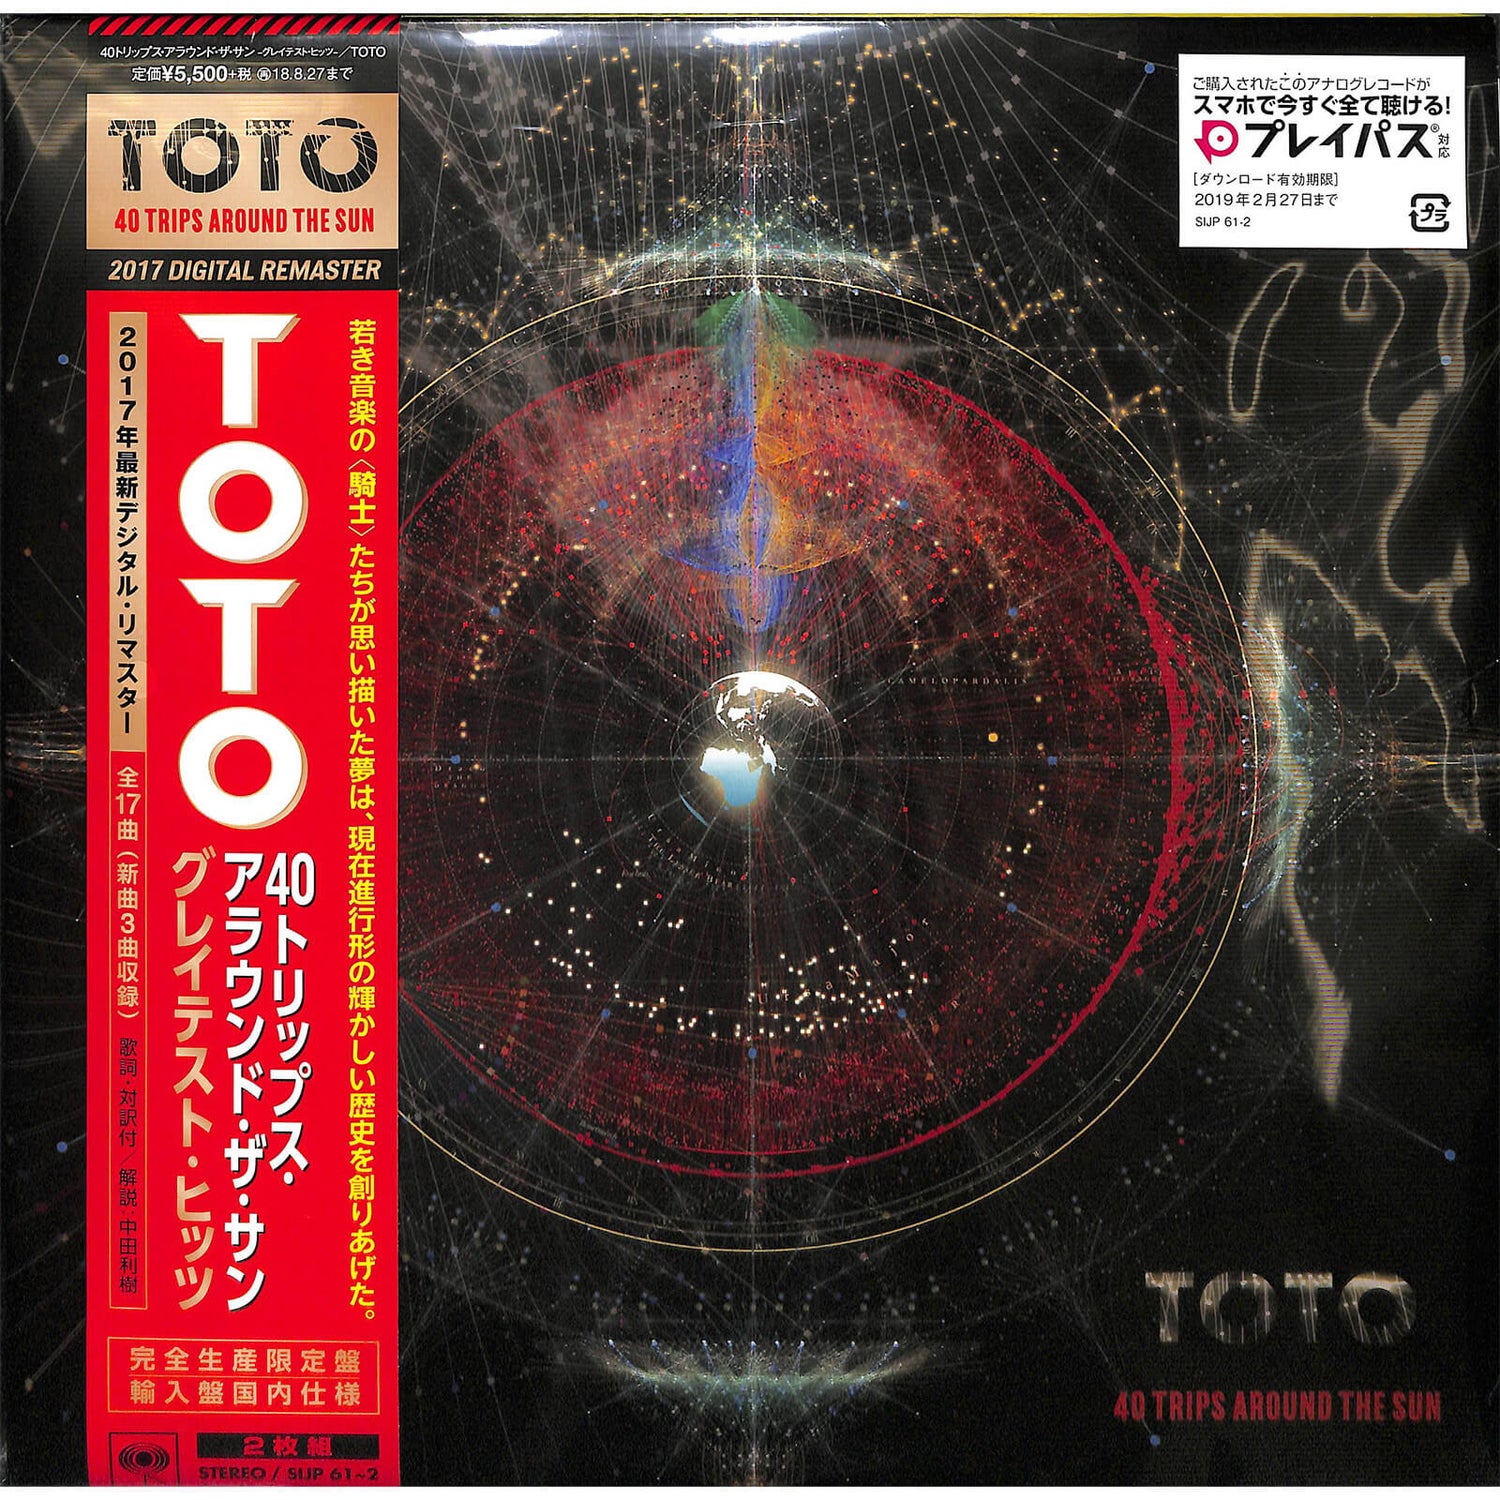 Toto - 40 Trips Around The Sun -Greatest Hits- (Limited Edition) LP Japanse Editie